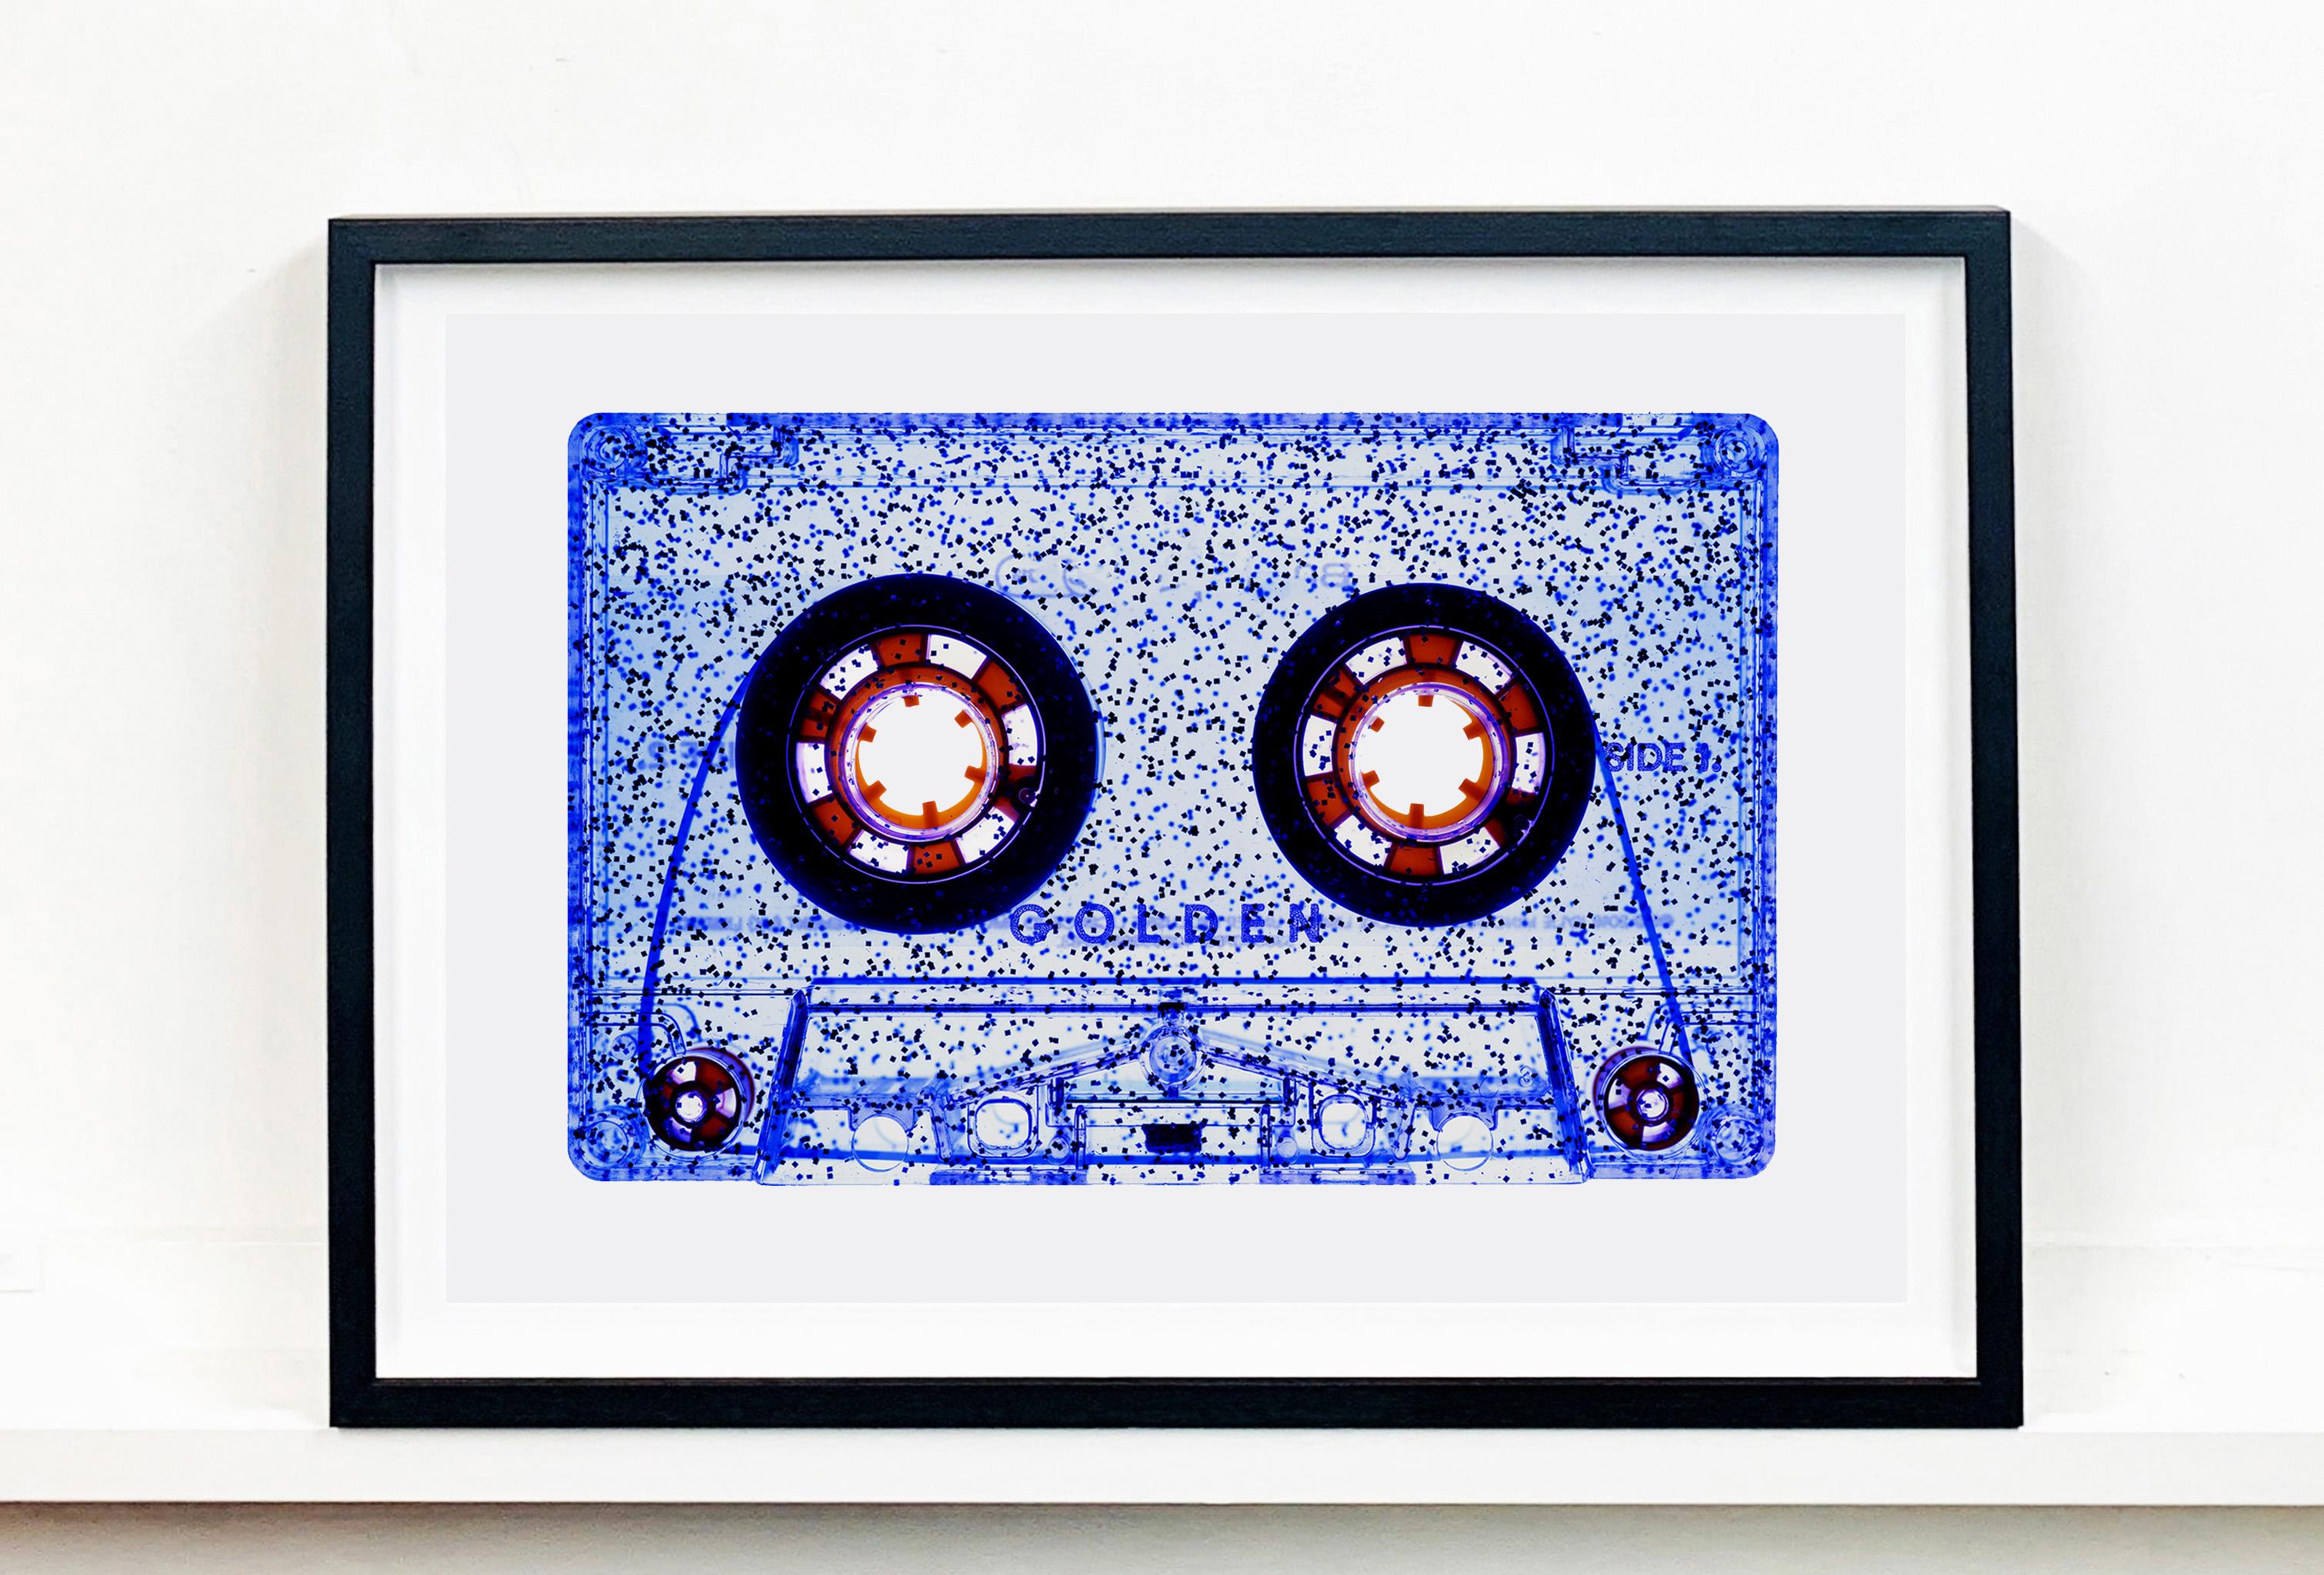 Tape Collection, All That Glitters is Not Golden (Blue) - Pop Art Photography - Contemporary Print by Heidler & Heeps